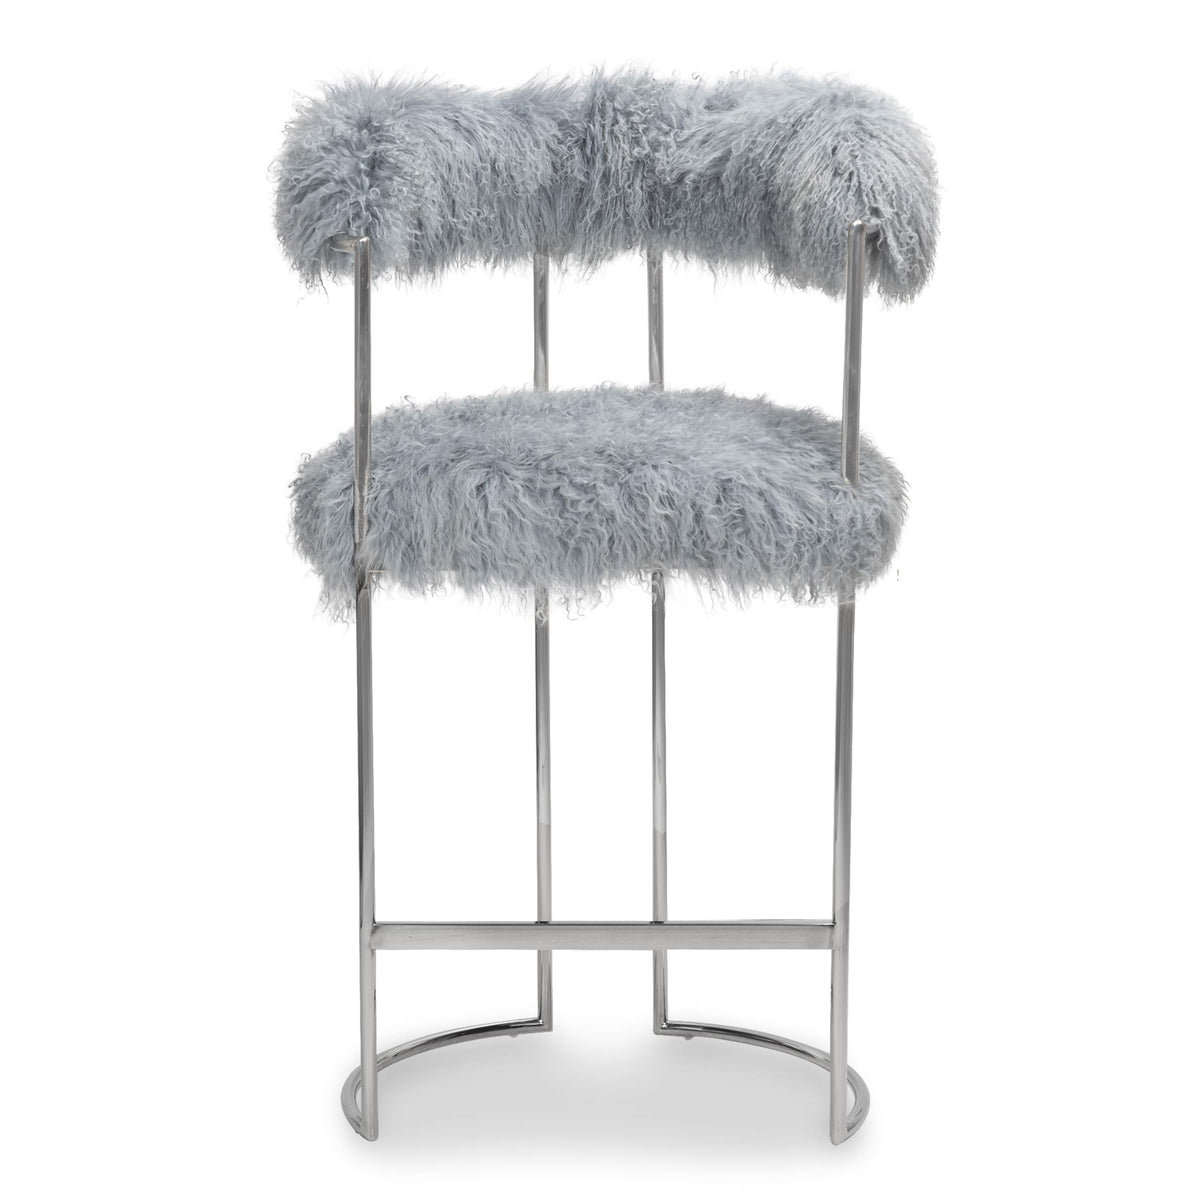 Acapulco 2 Bar and Counter Stool in Mongolian Fur